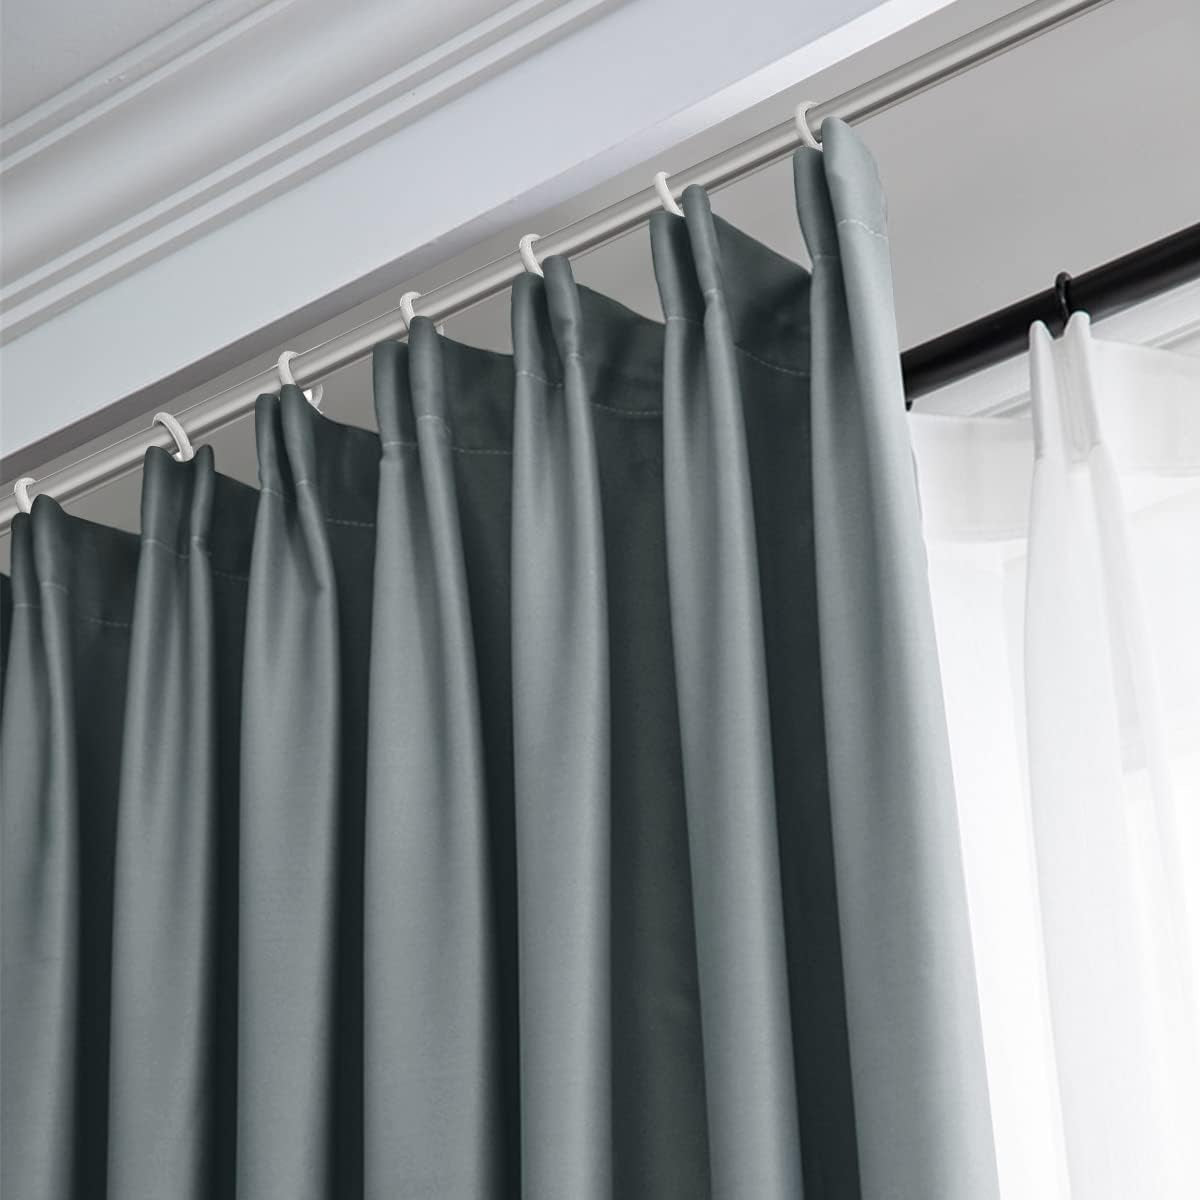 Pinch Pleat Solid Thermal Insulated 95% Greyout Patio Door Curtain Panel Drape for Traverse Rod and Track, Grey 120" W X 84" L (One Panel)